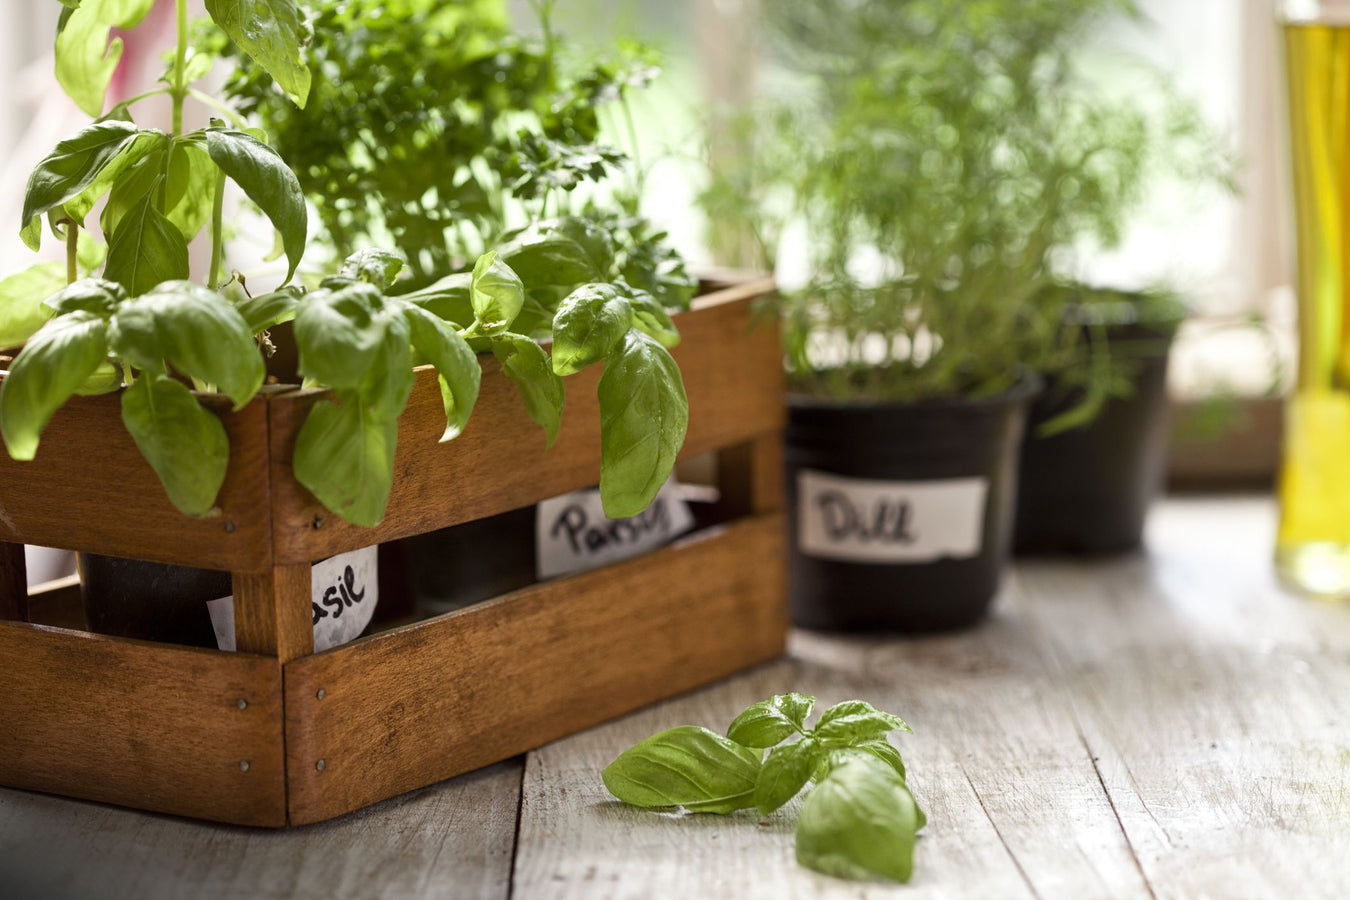 Grow Your Own Herbs